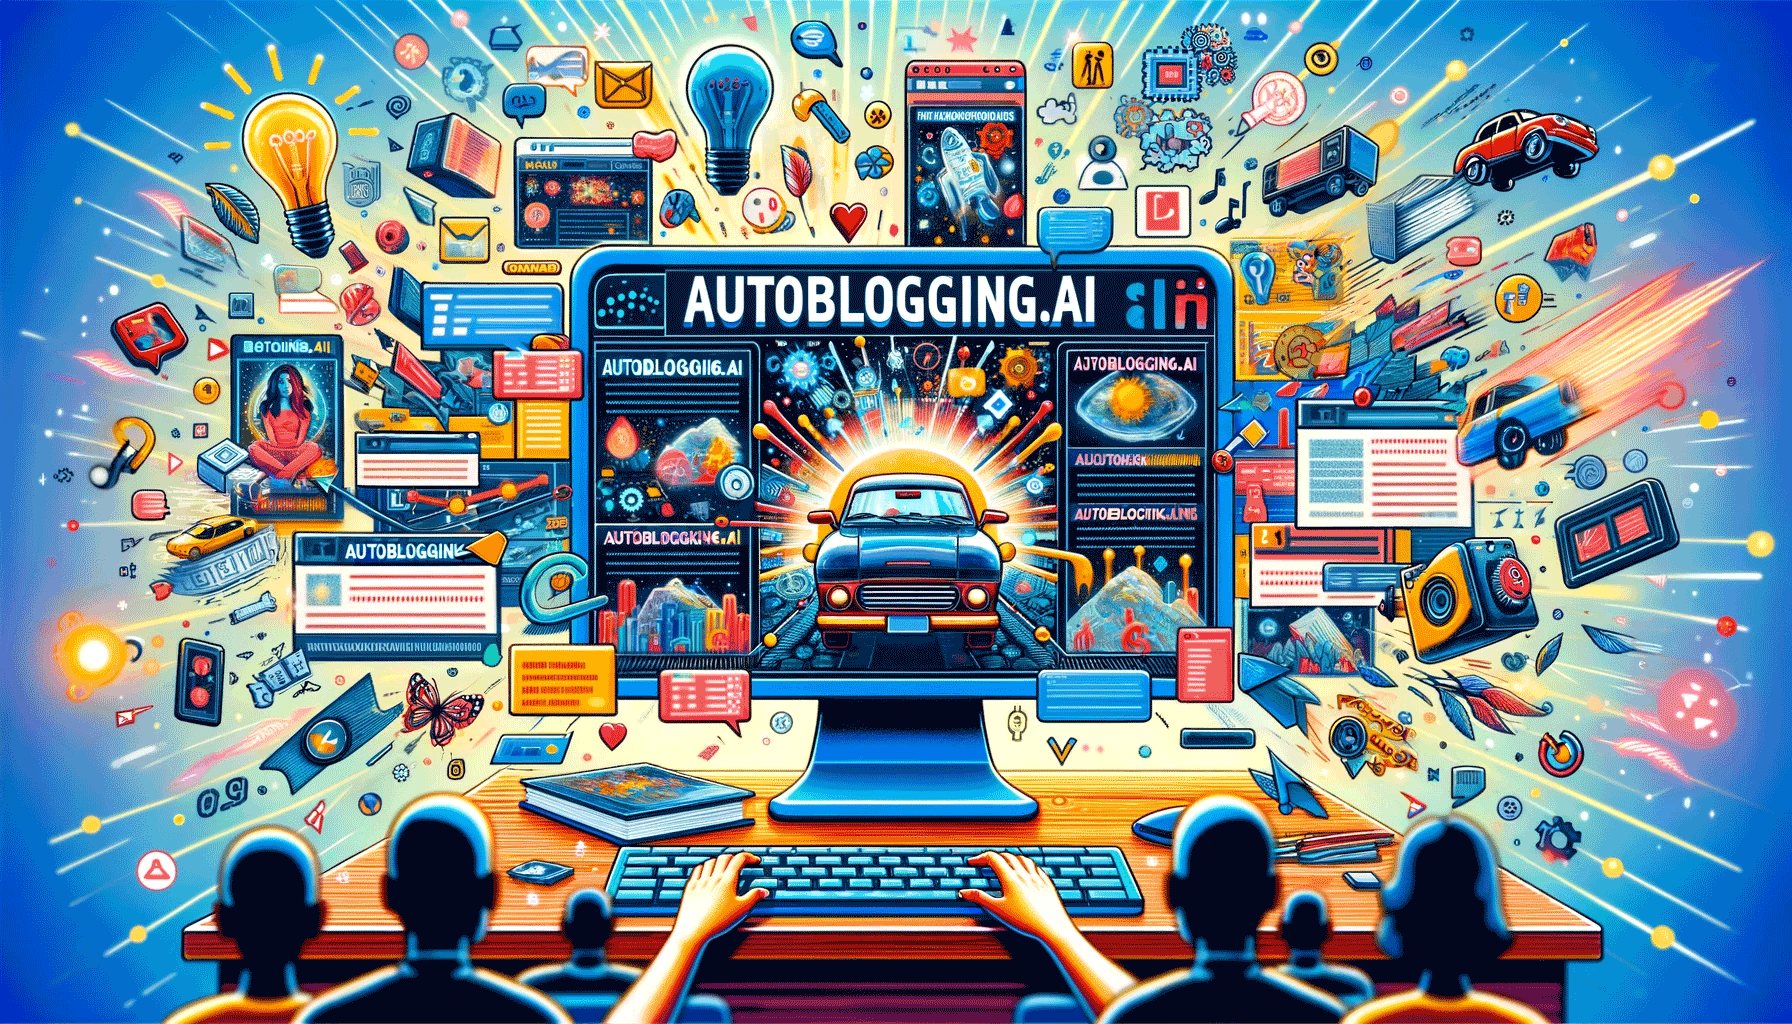 Image representing Autoblogging.ai, focusing on its content generation capabilities. It features a dynamic scene with a computer screen display